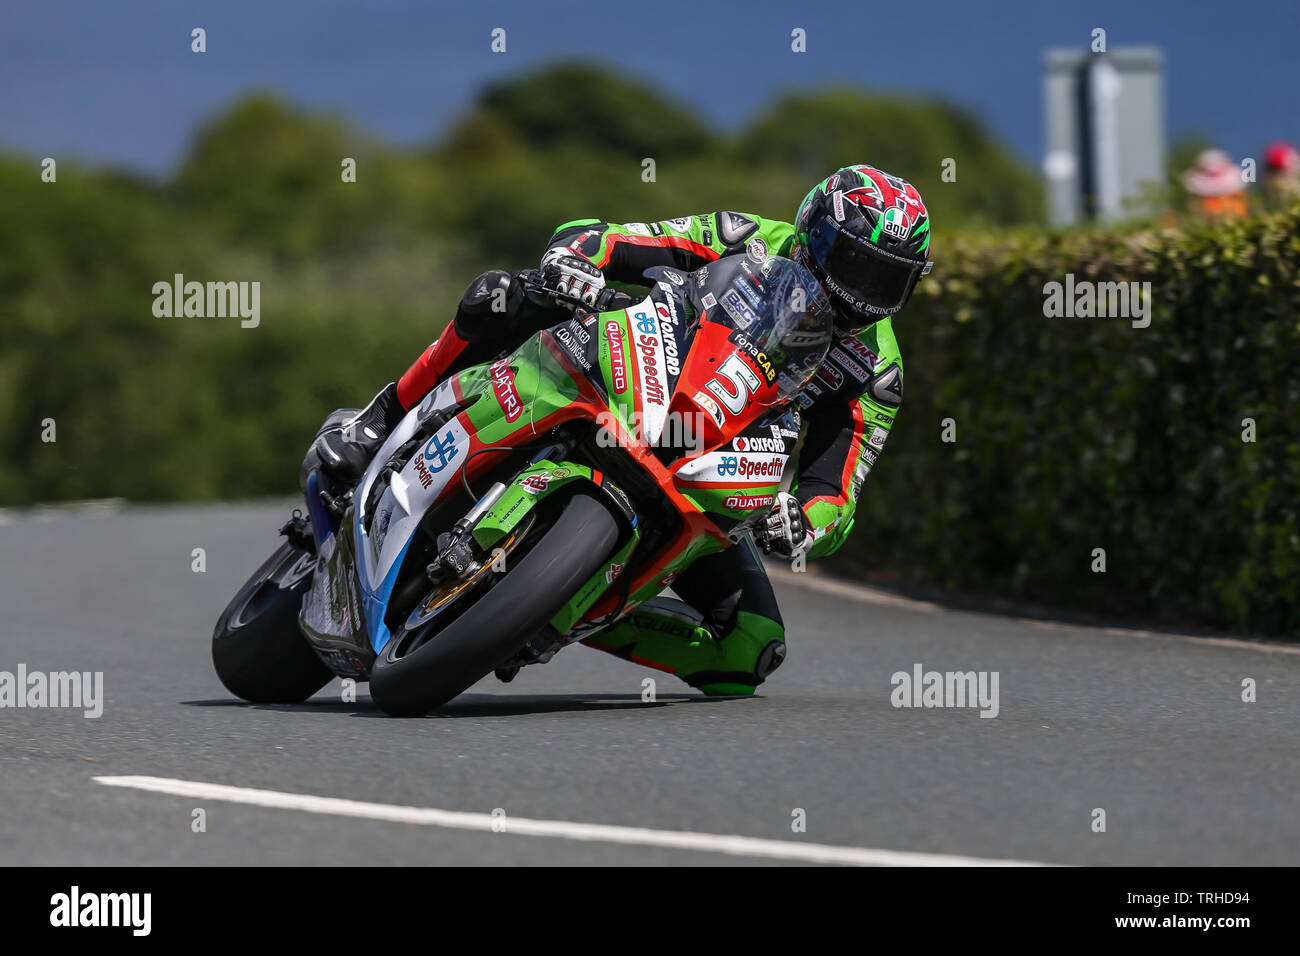 Douglas, Isle Of Man. 06th June, 2019. James Hillier (5) - Quattro Plant Wicked Coatings Kawasaki Kawasaki on his way to finishing third in the Monster Energy Supersport TT class Race 2 at the 2019 Isle of Man TT (Tourist Trophy) Races, Fuelled by Monster Energy DOUGLAS, ISLE OF MAN - June 06. Photo by David Horn. Credit: PRiME Media Images/Alamy Live News Stock Photo